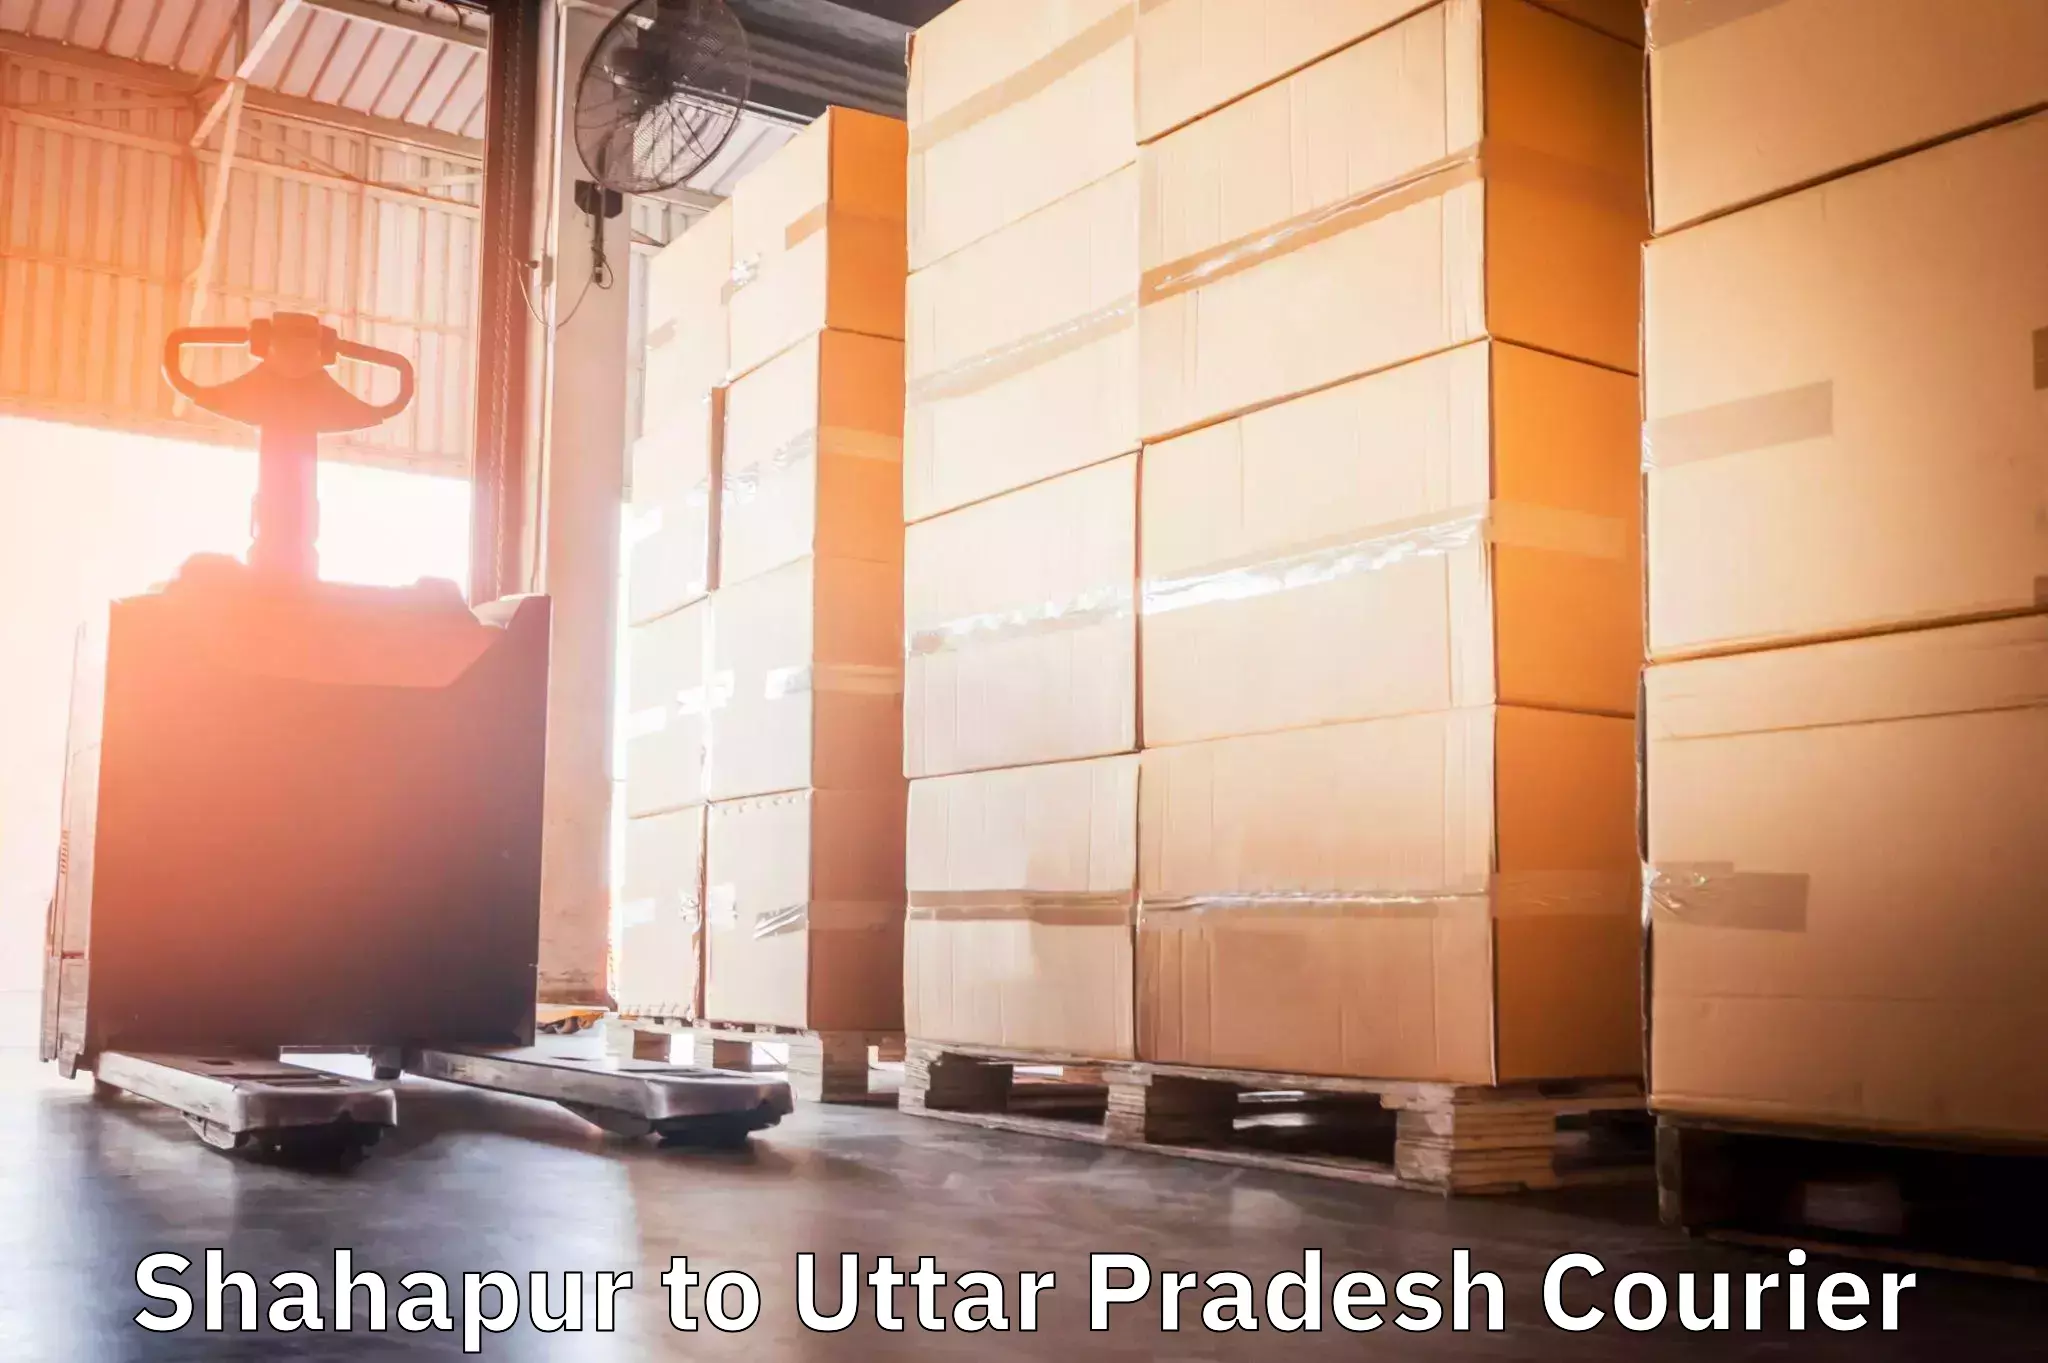 Multi-national courier services Shahapur to Kirauli